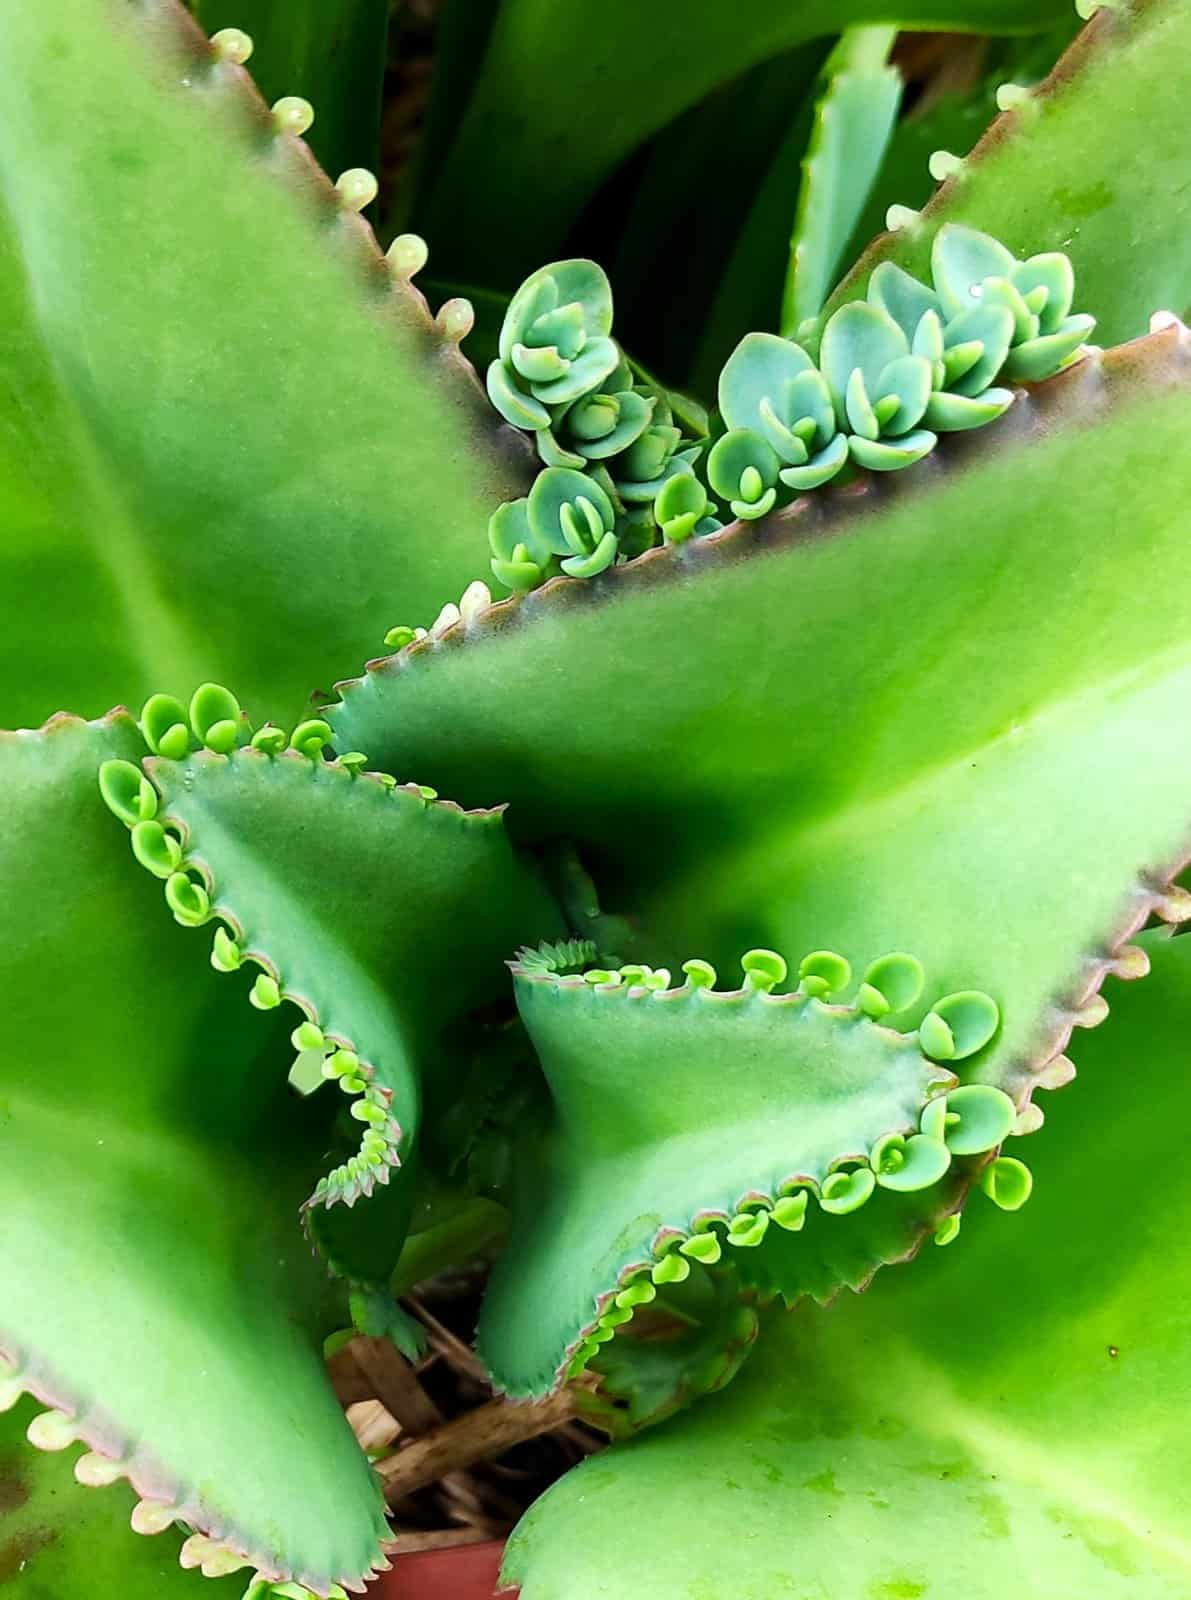 plantlets on Kalanchoe daigremontiana's leaves